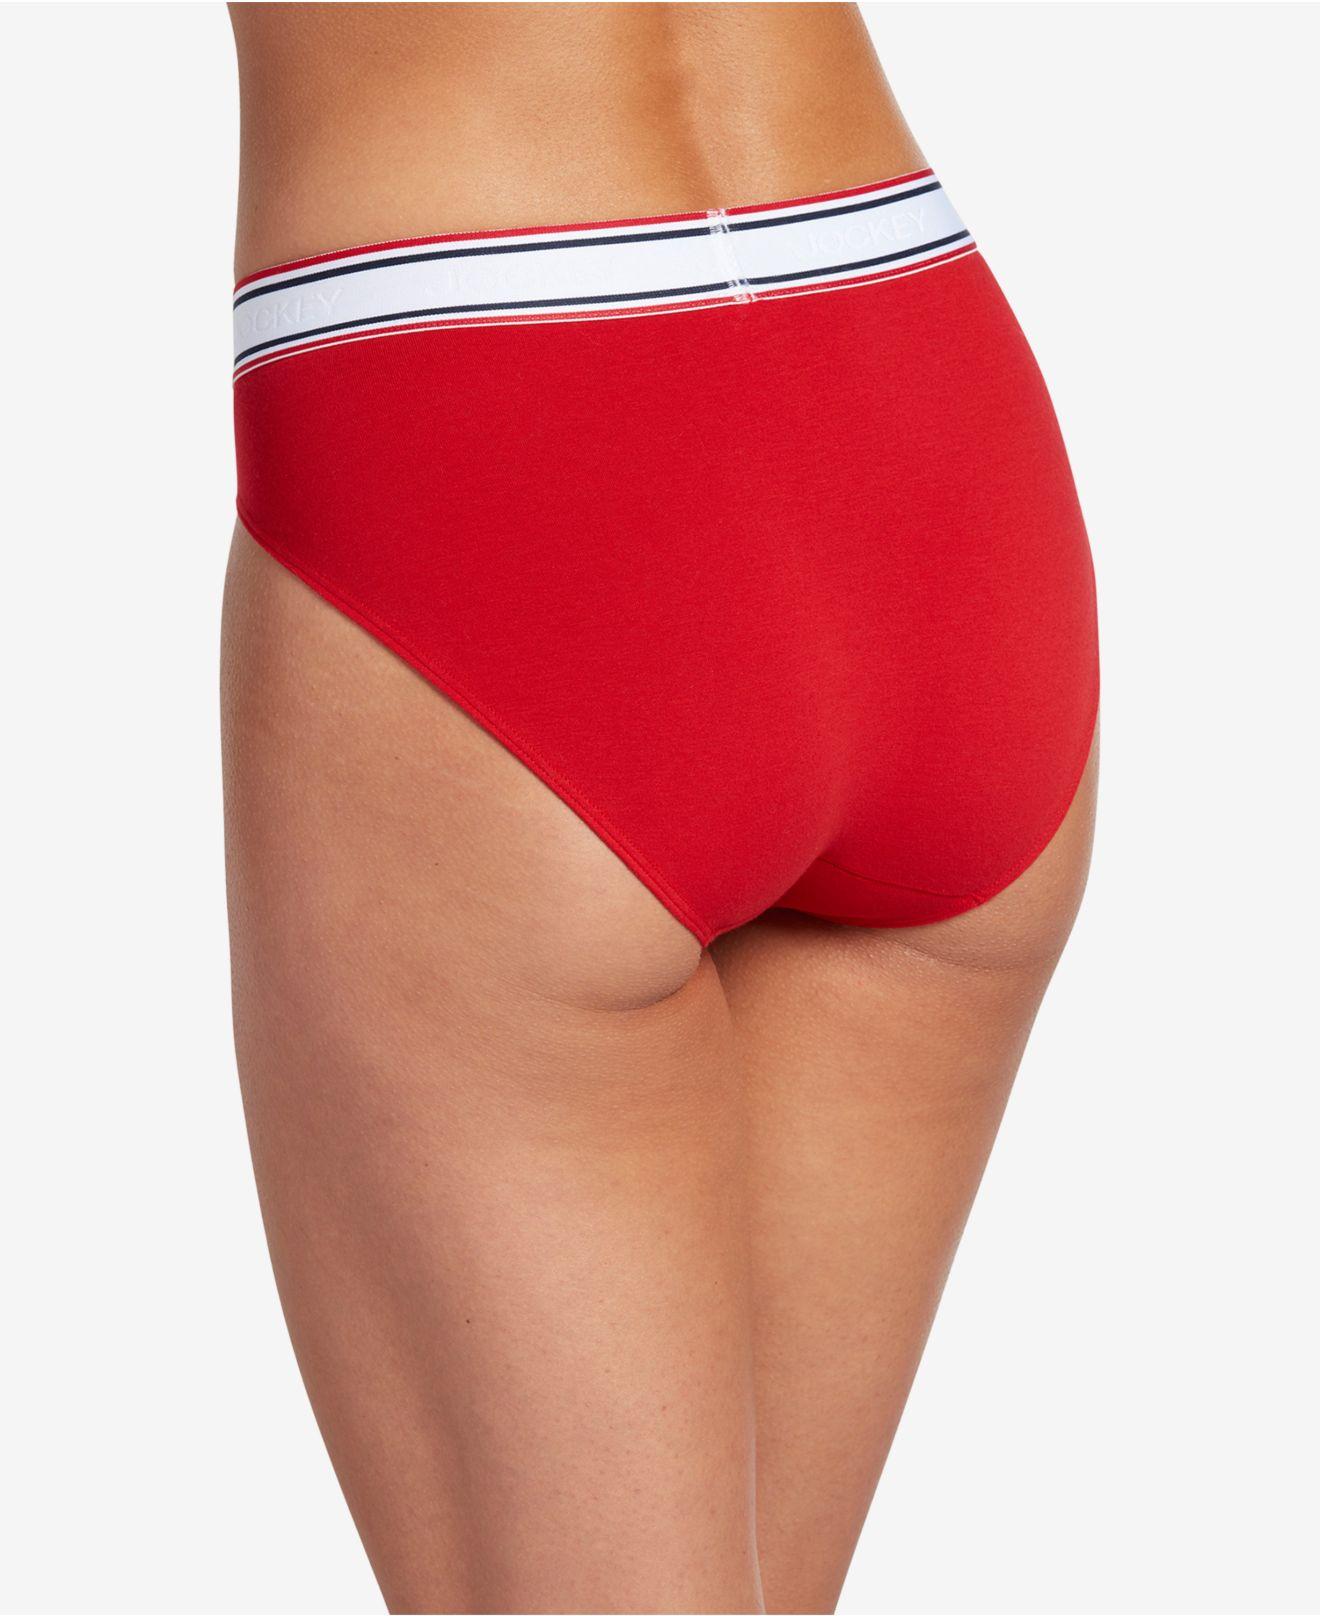 Jockey Retro Stripe Hi-cut Panty Underwear 2254, First At Macy's, Also  Available In Extended Sizes in Red